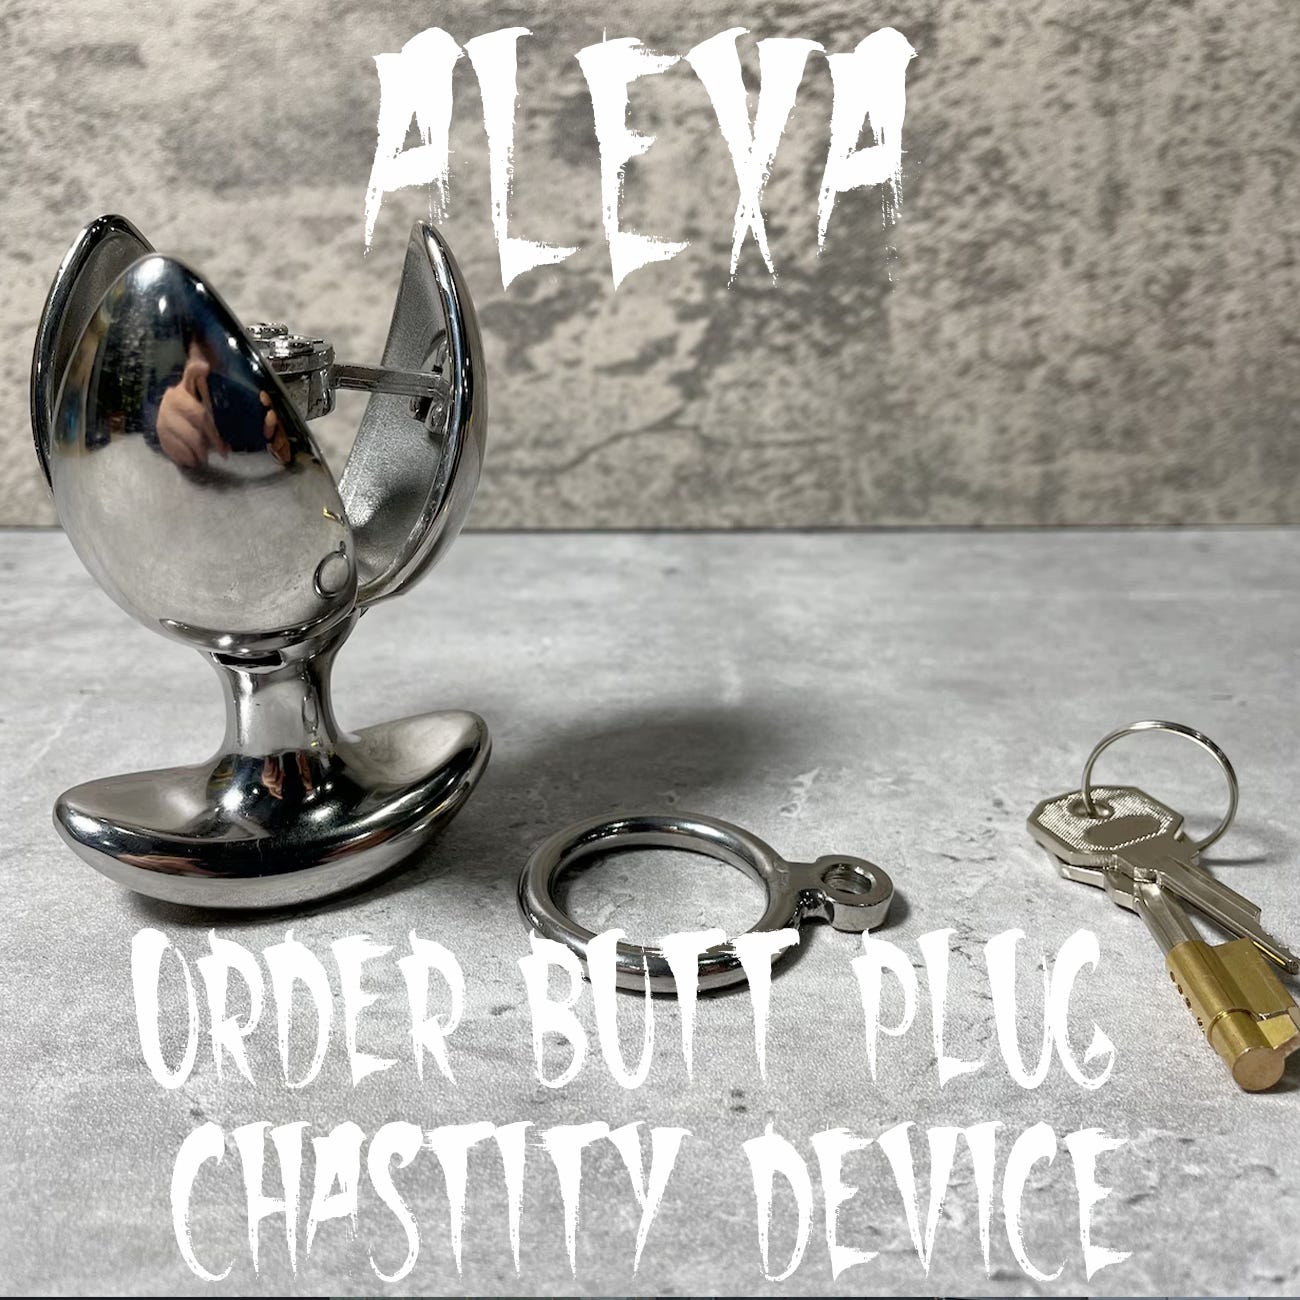 Alexa, order butt plug chastity device -- with an image of a butt plug that expands in the asshole and a key that powers it